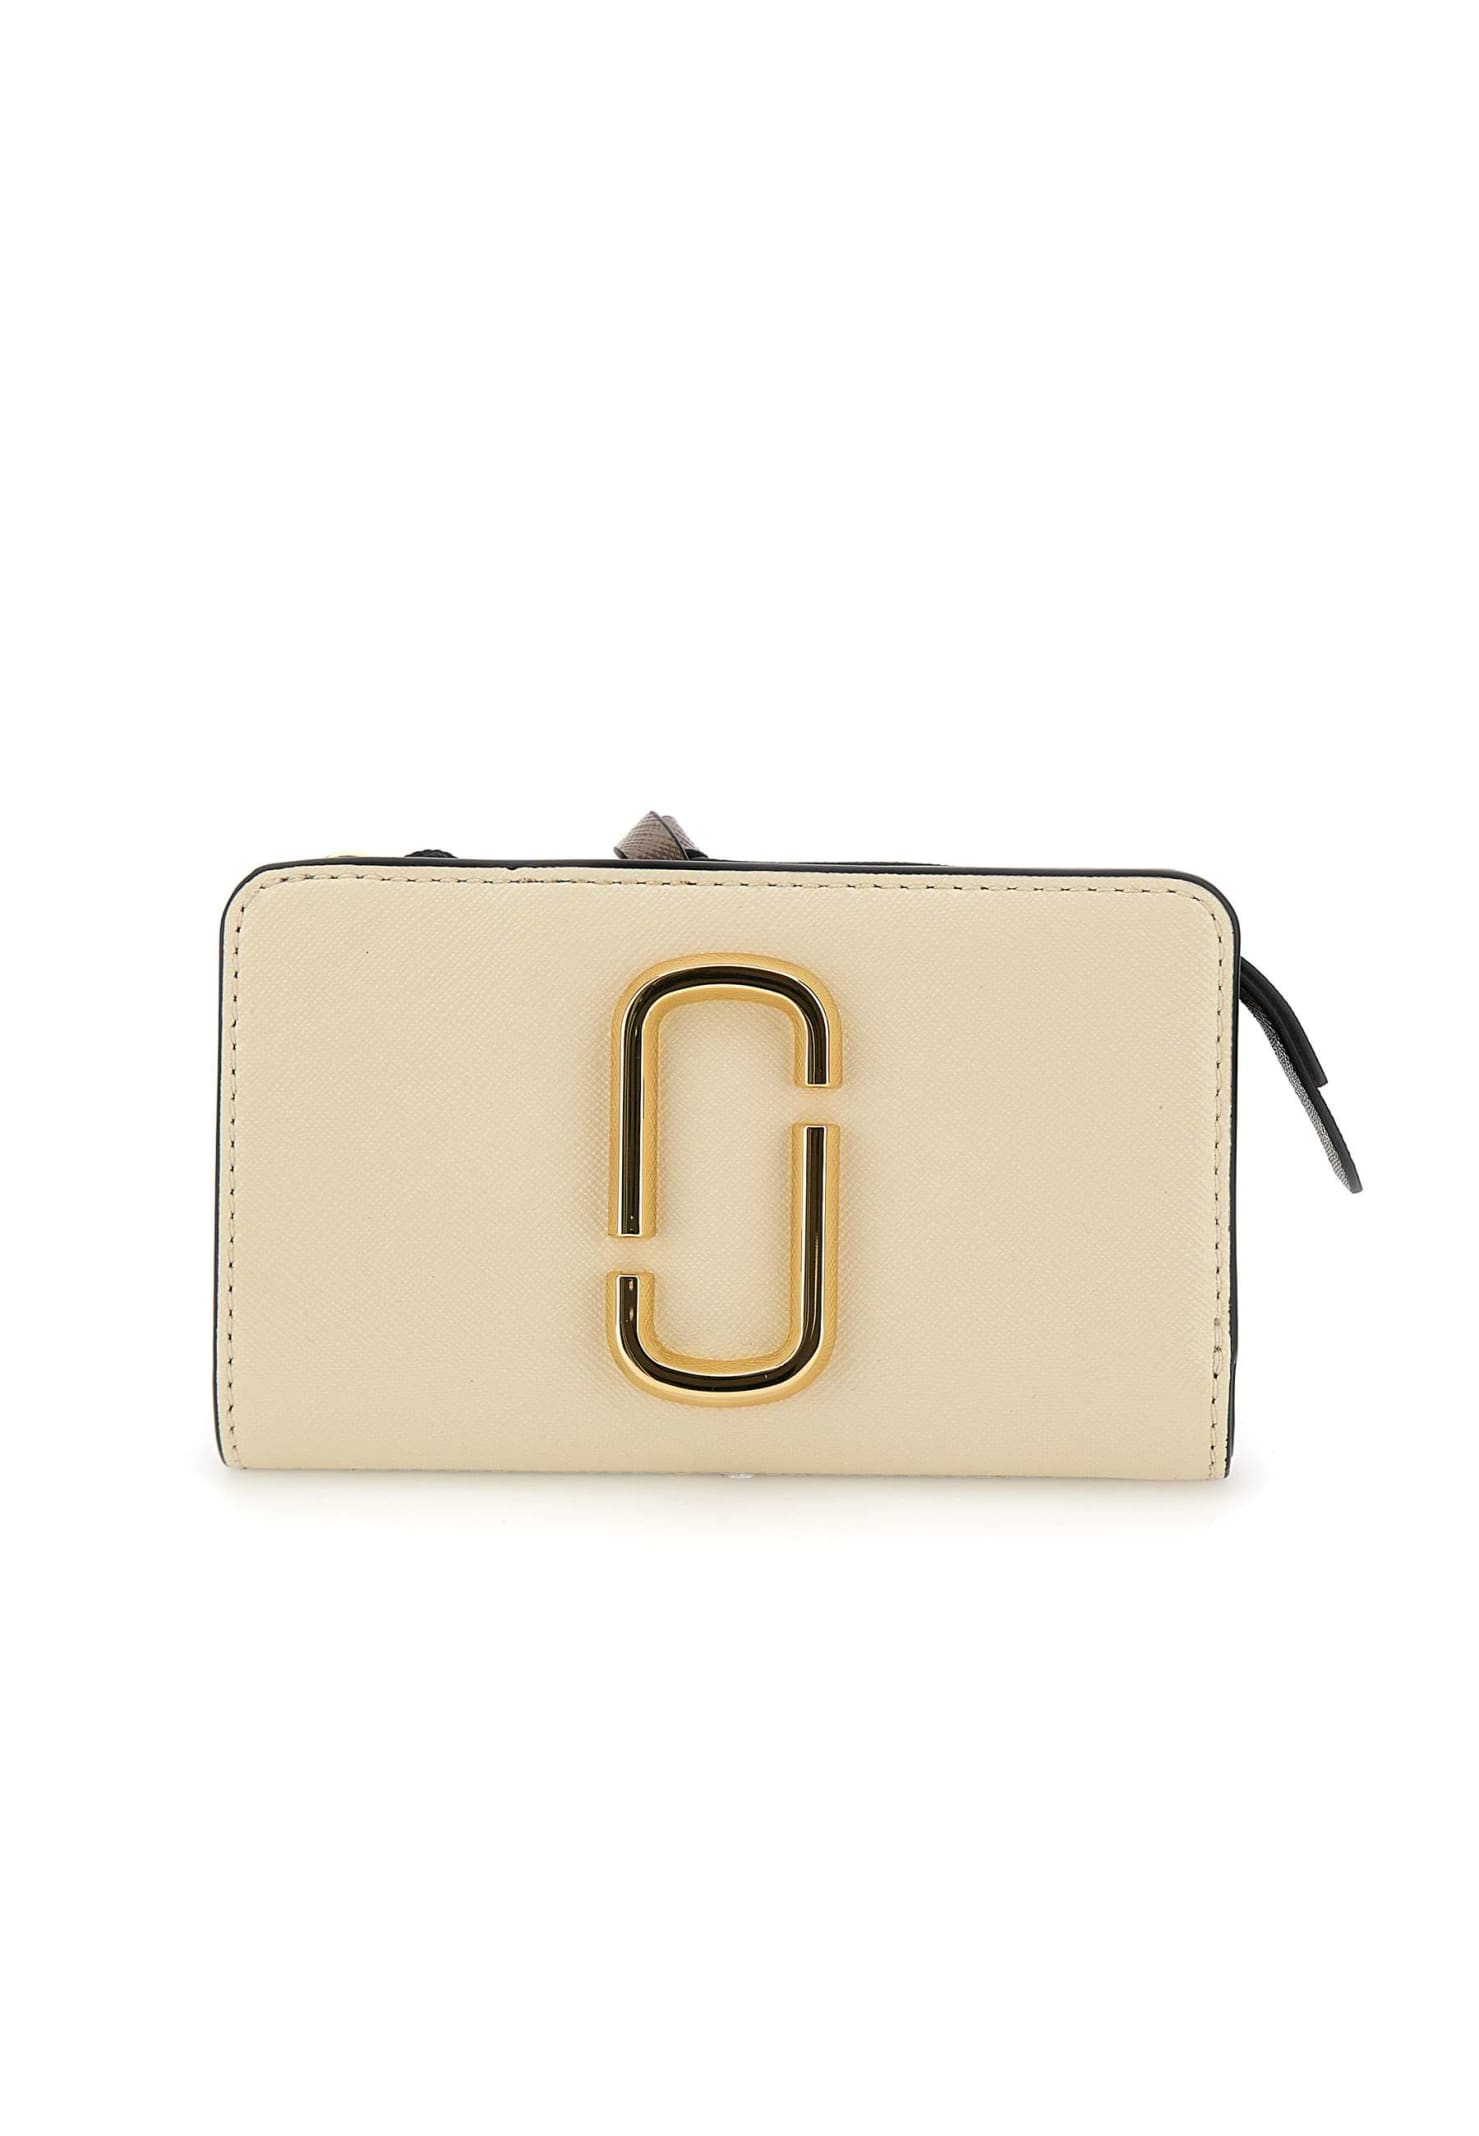 MARC JACOBS LEATHER COMPACT WALLET